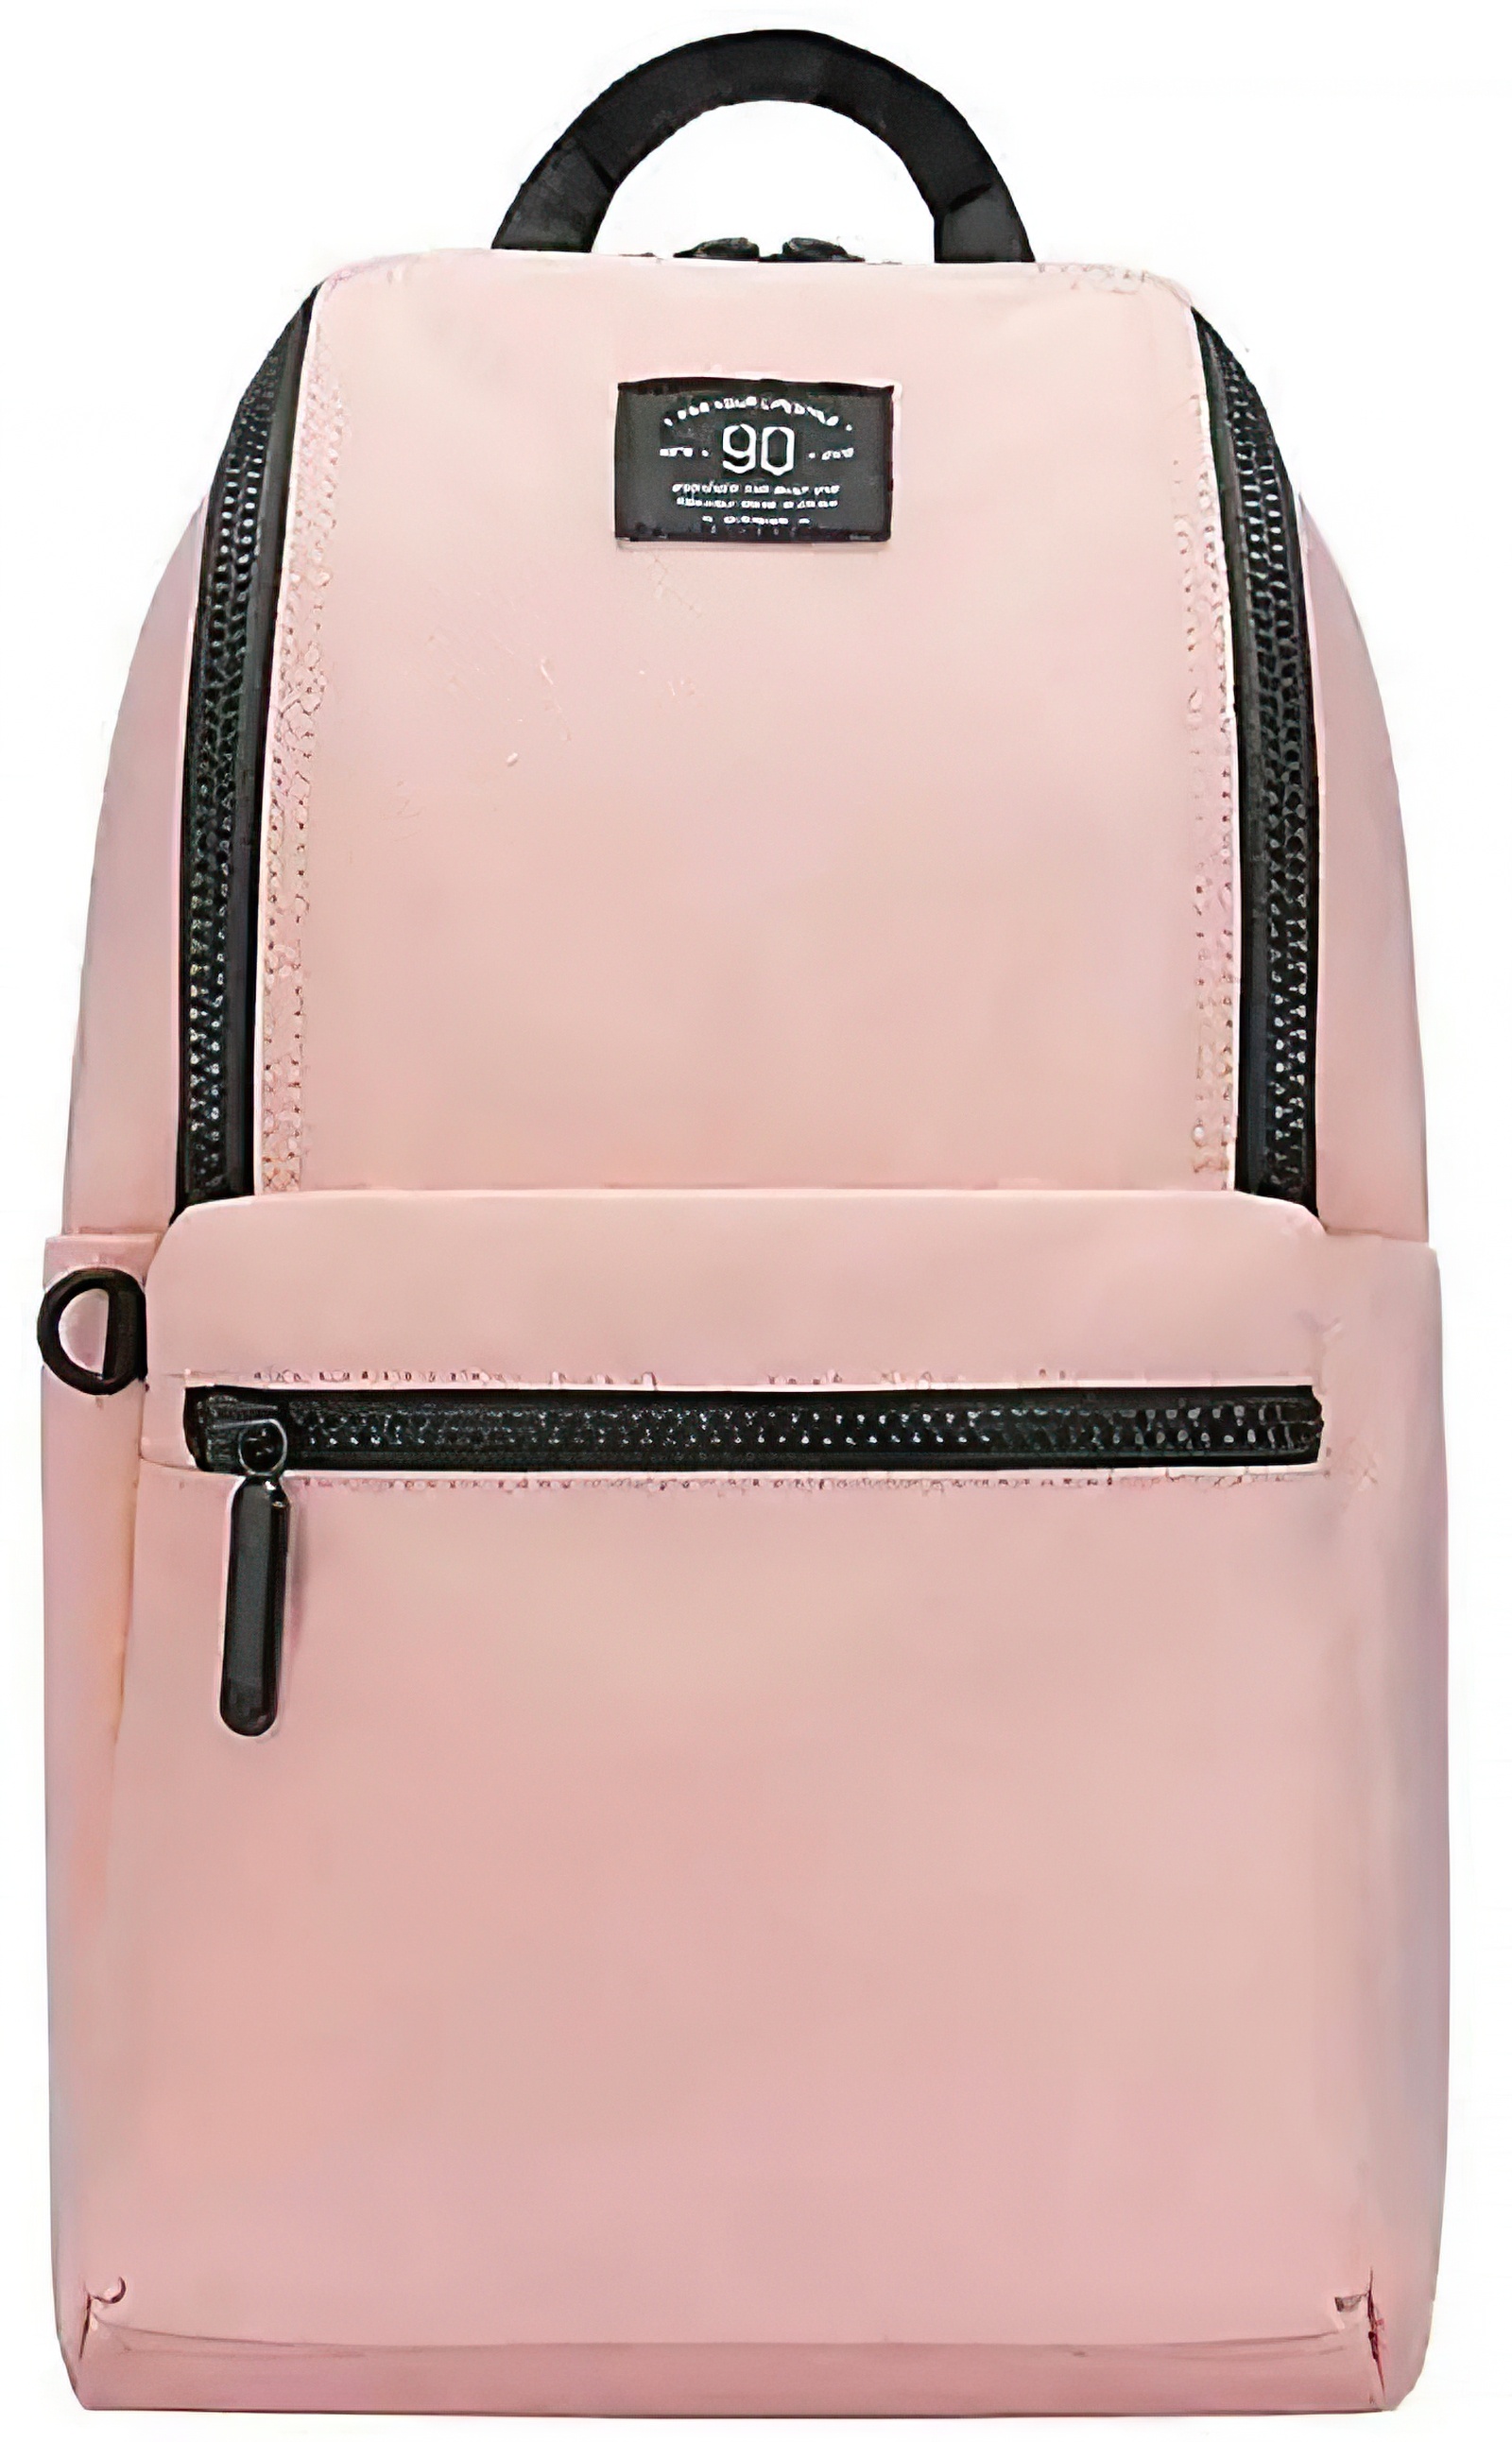 фото Рюкзак xiaomi 90 points pro leisure travel backpack 18l pink